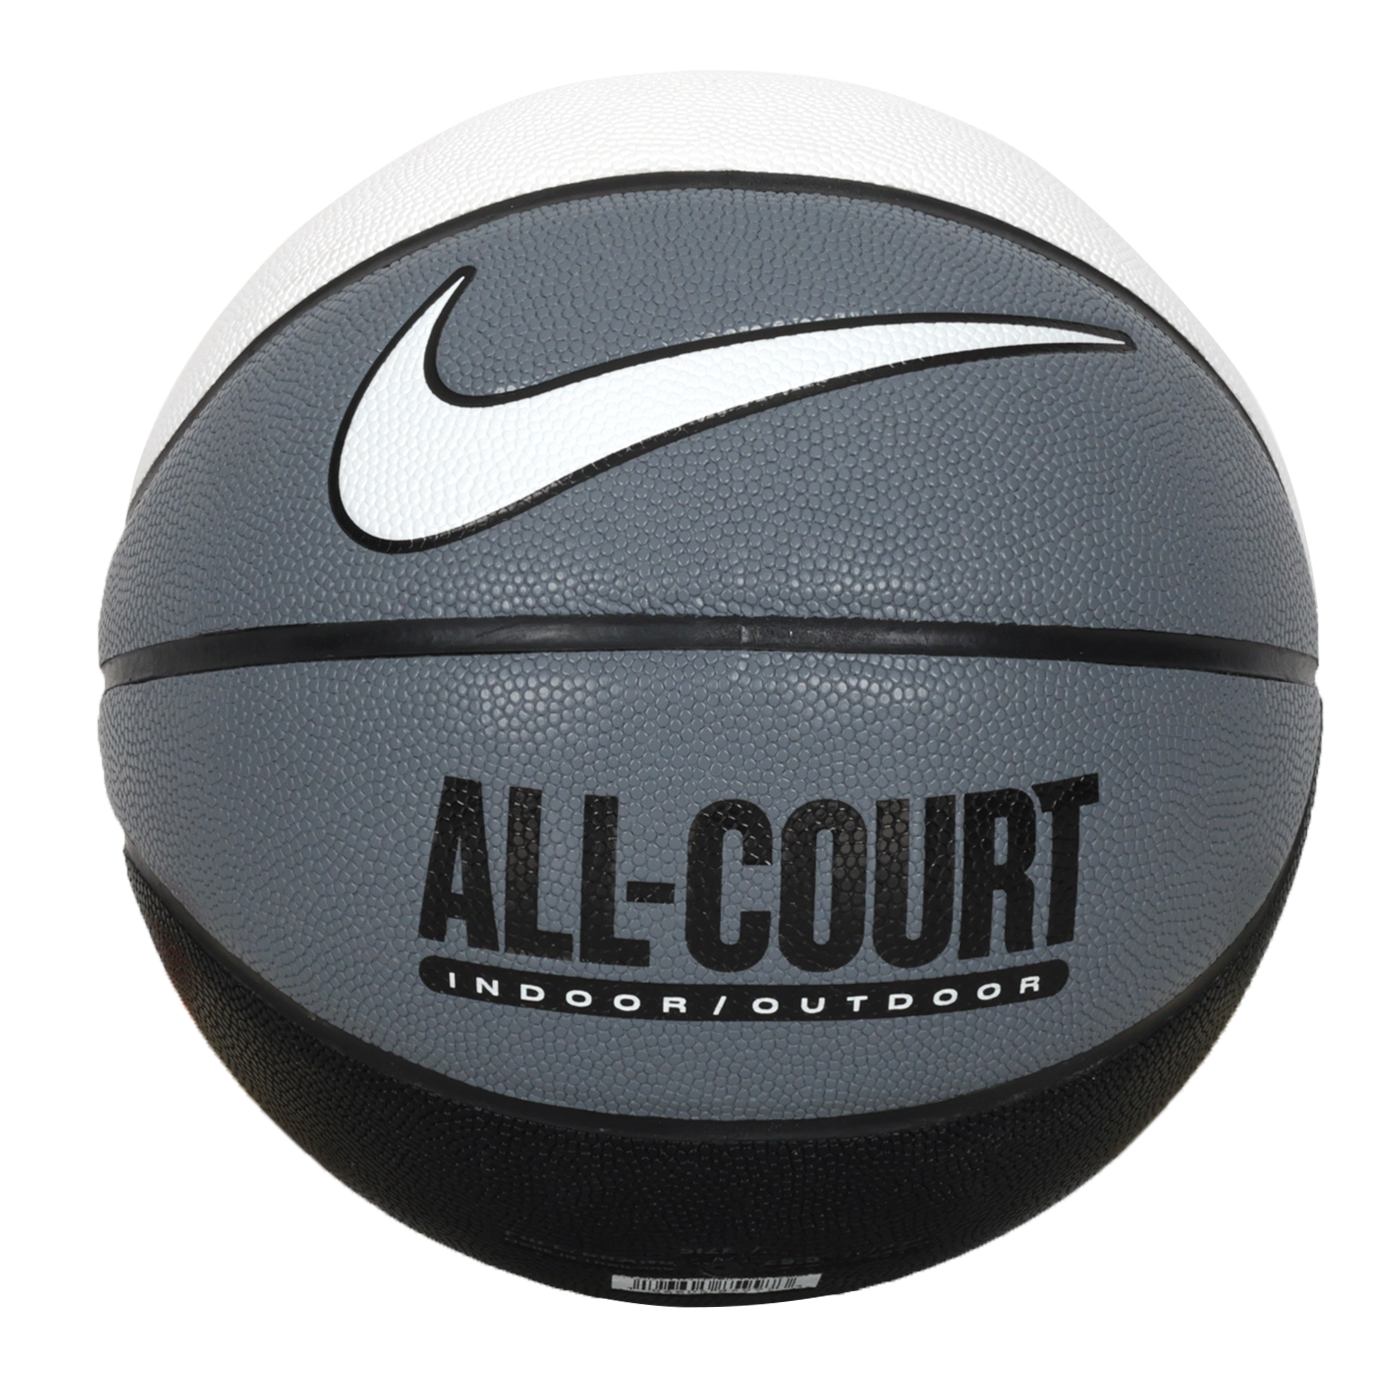 NIKE EVERYDAY ALL COURT 8P 7號籃球  N100436912007